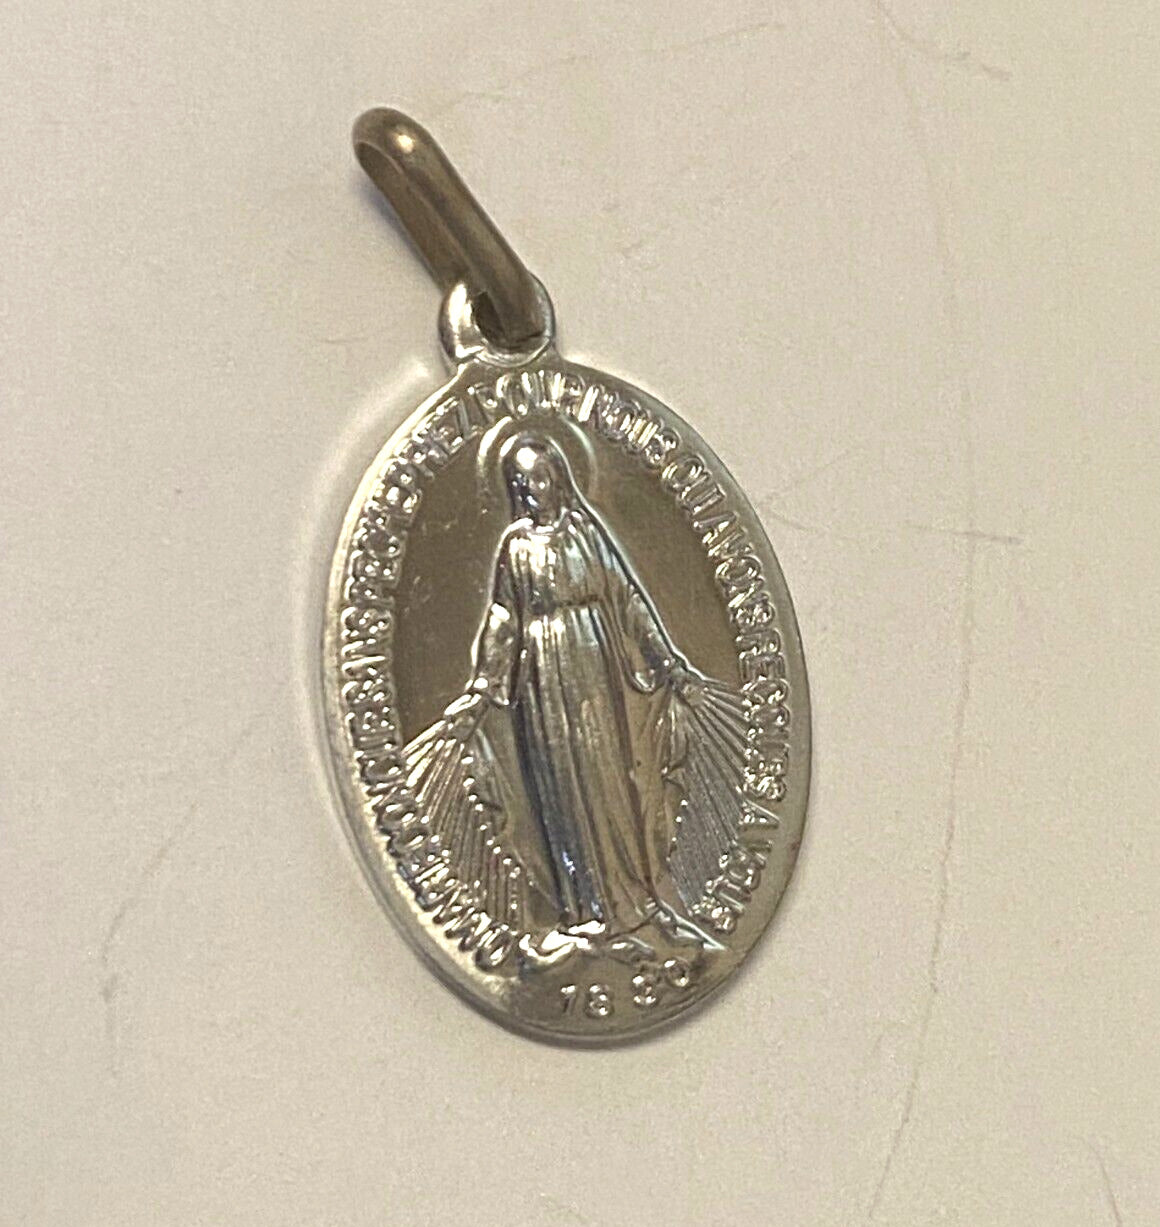 Our Lady of the Miraculous Silver tone  Image .50" Medal, New from Italy - Bob and Penny Lord